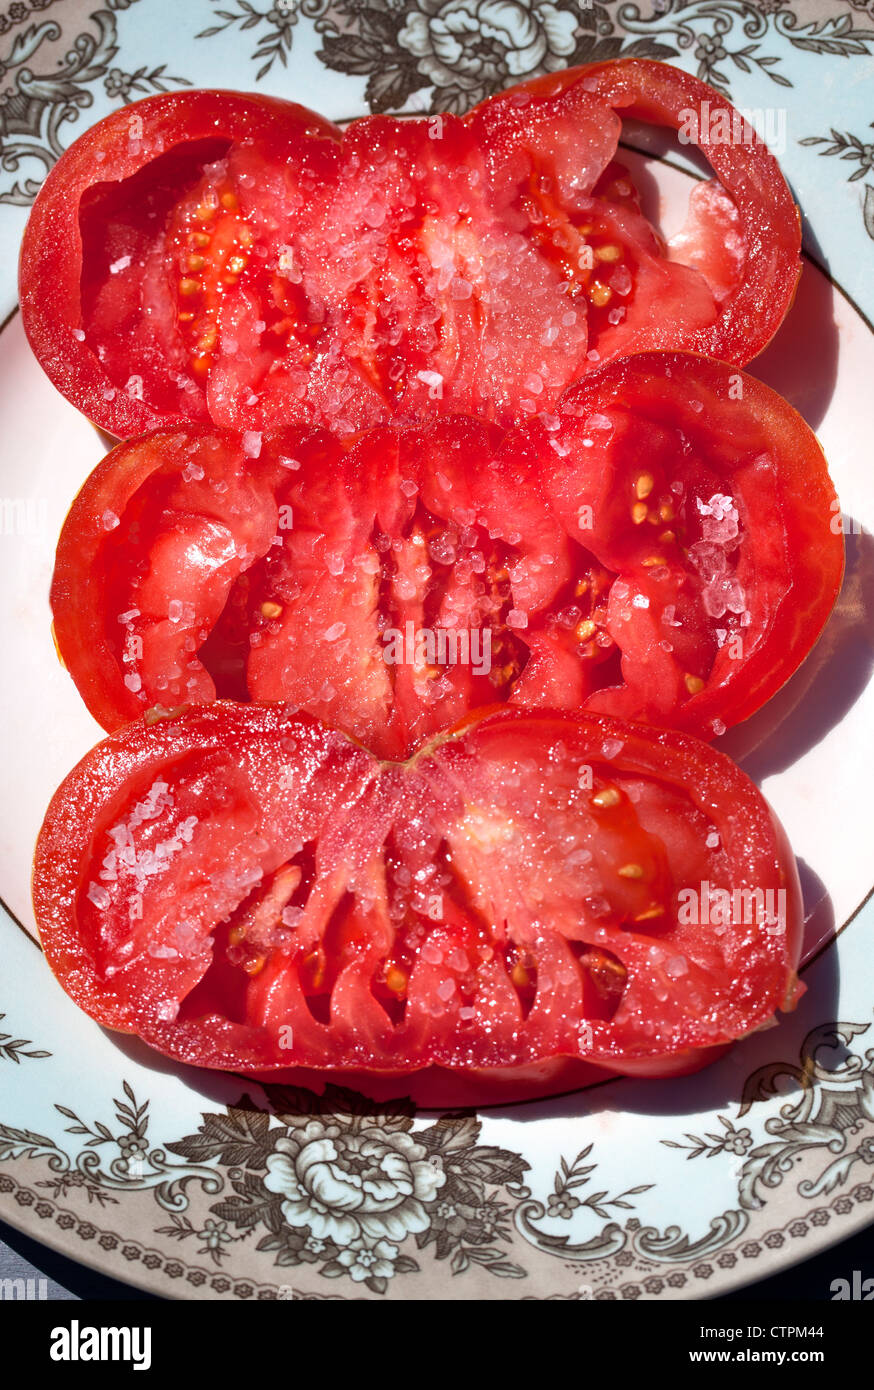 Slices of Pink Beef or Zapotec Pleated Tomato with Sea Salt Stock Photo